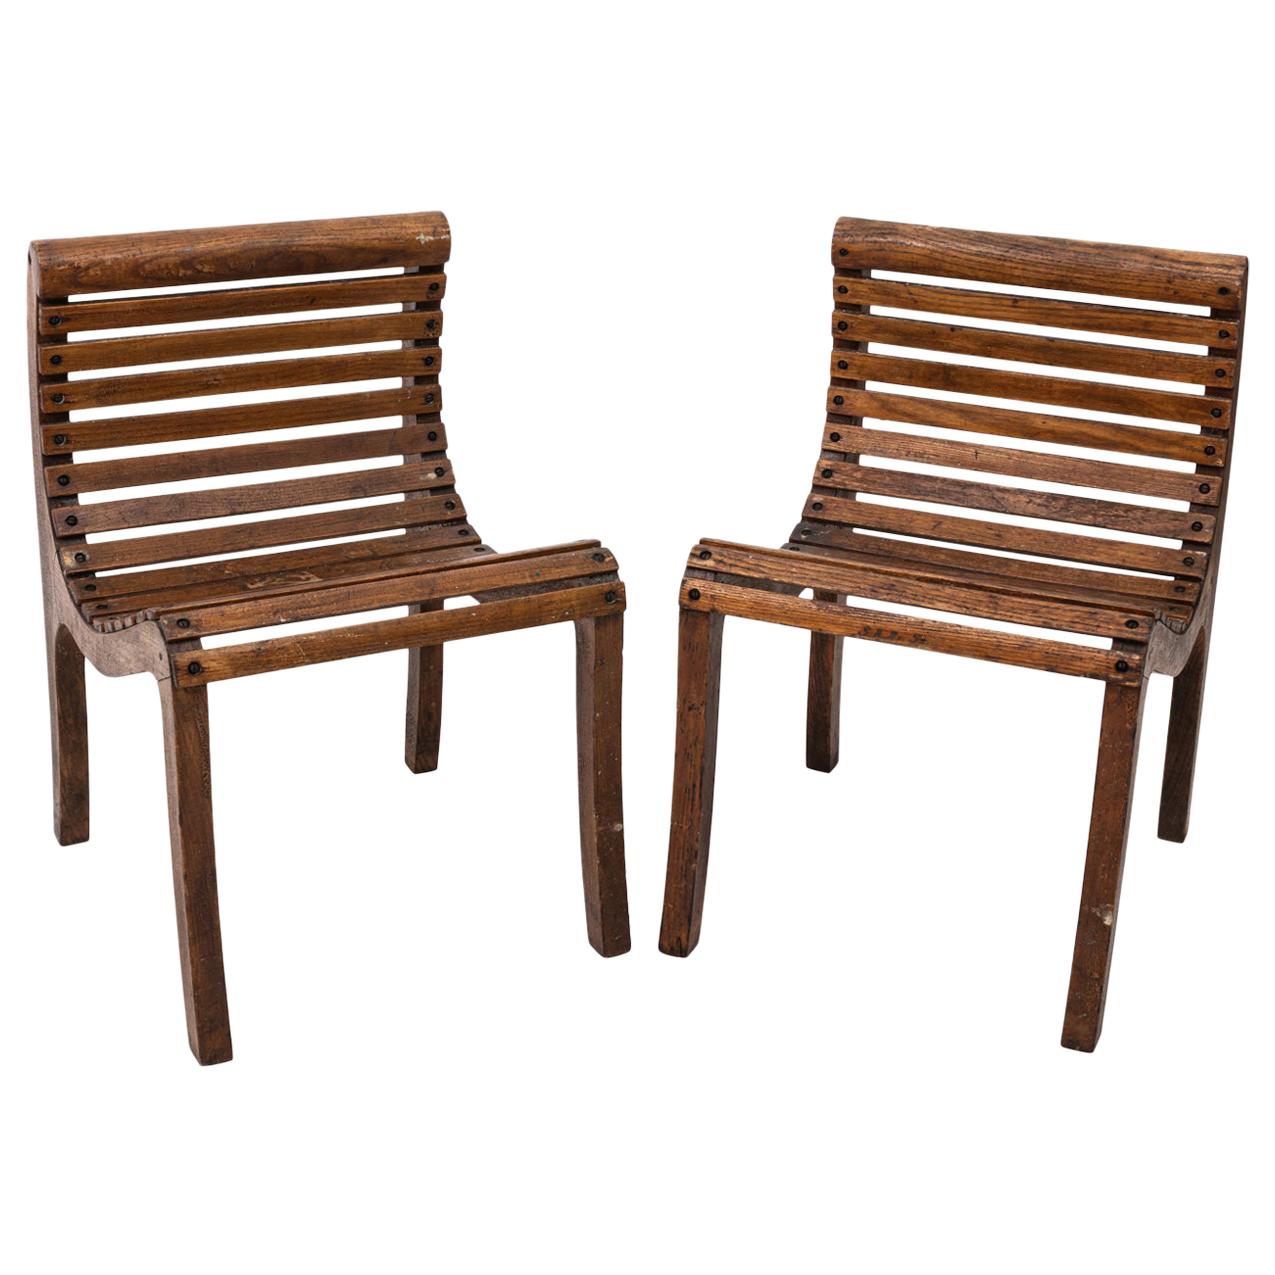 Pair of Lolling Oak Chairs